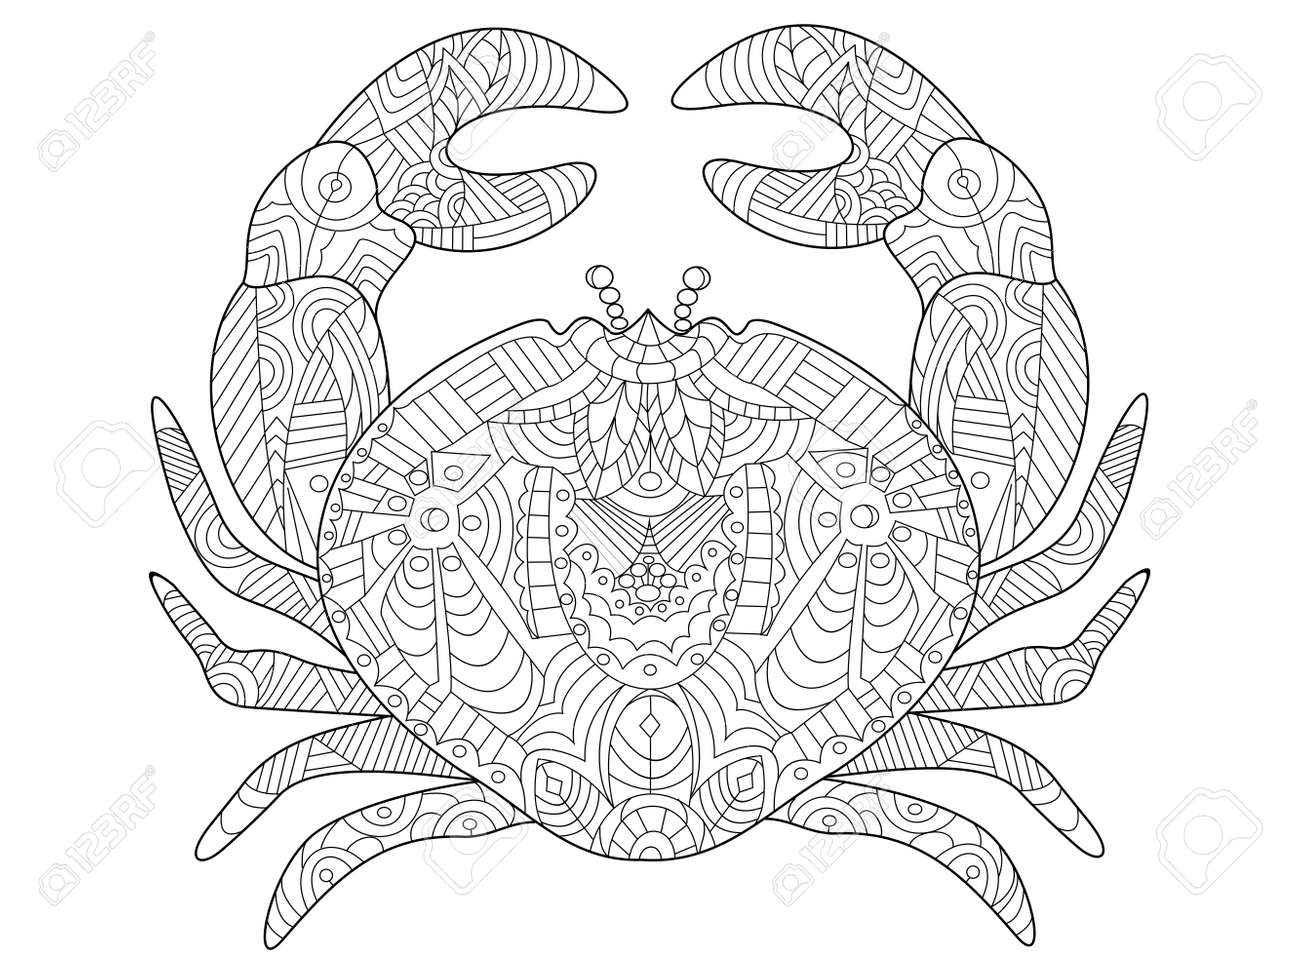 Crab sea animal coloring book for adults vector illustration royalty free svg cliparts vectors and stock illustration image